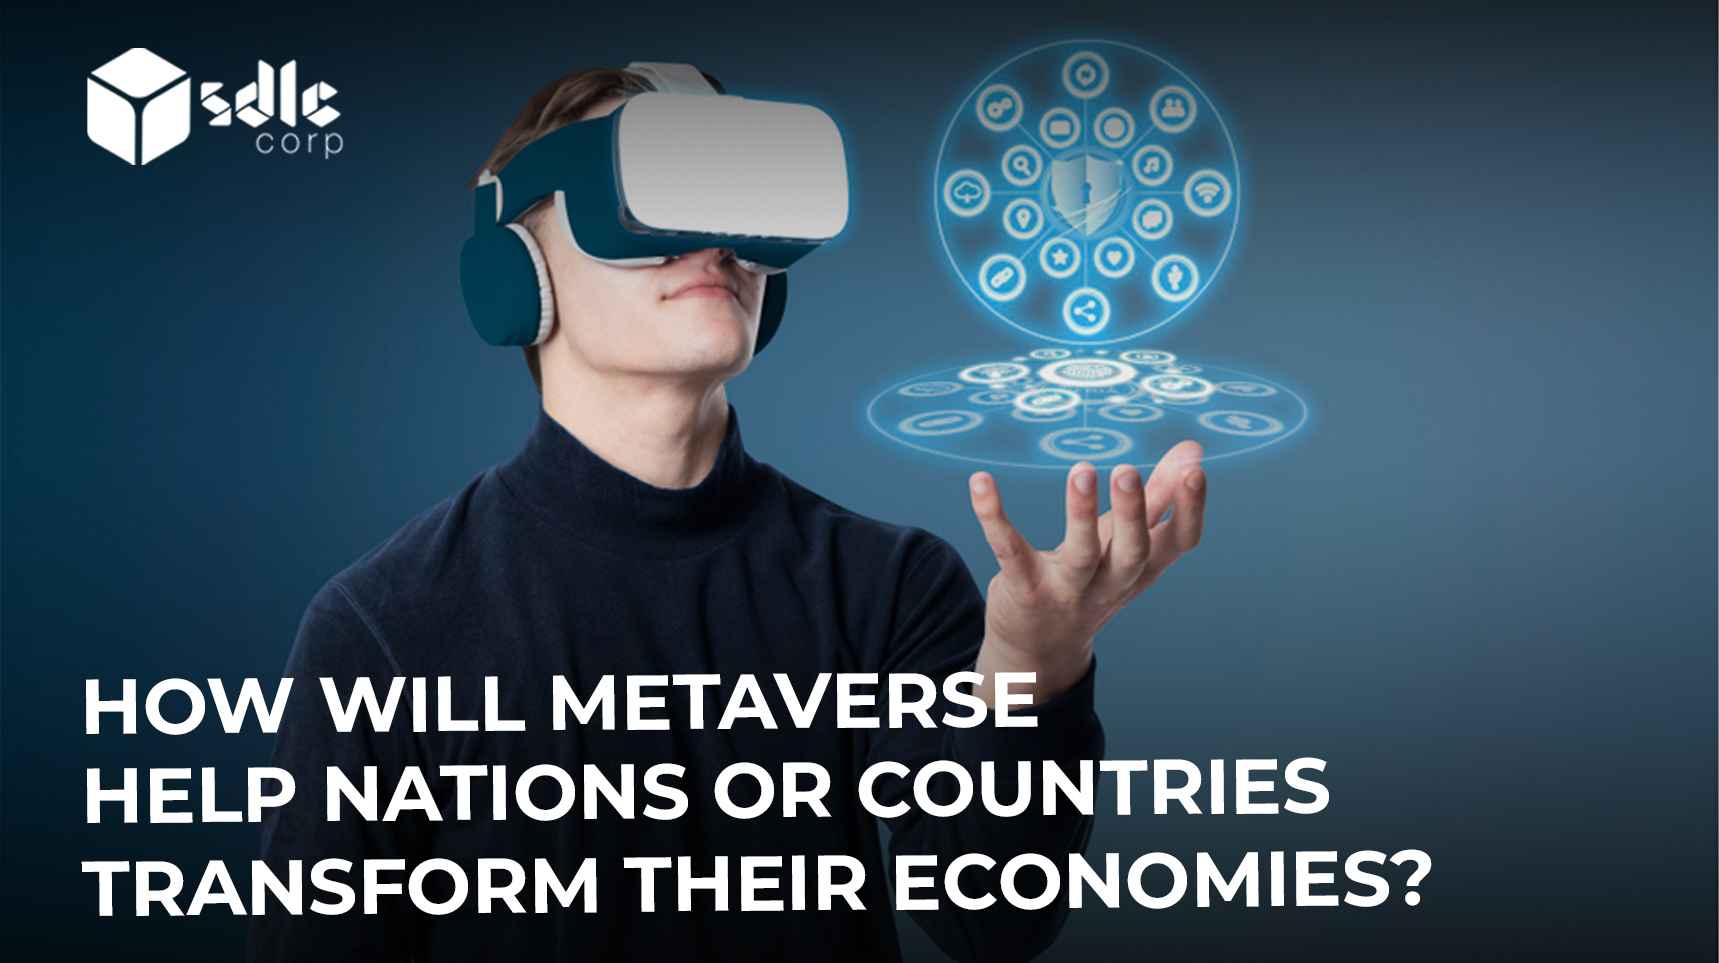 How-will-Metaverse-help-nations-or-countries-transform-their-economies.